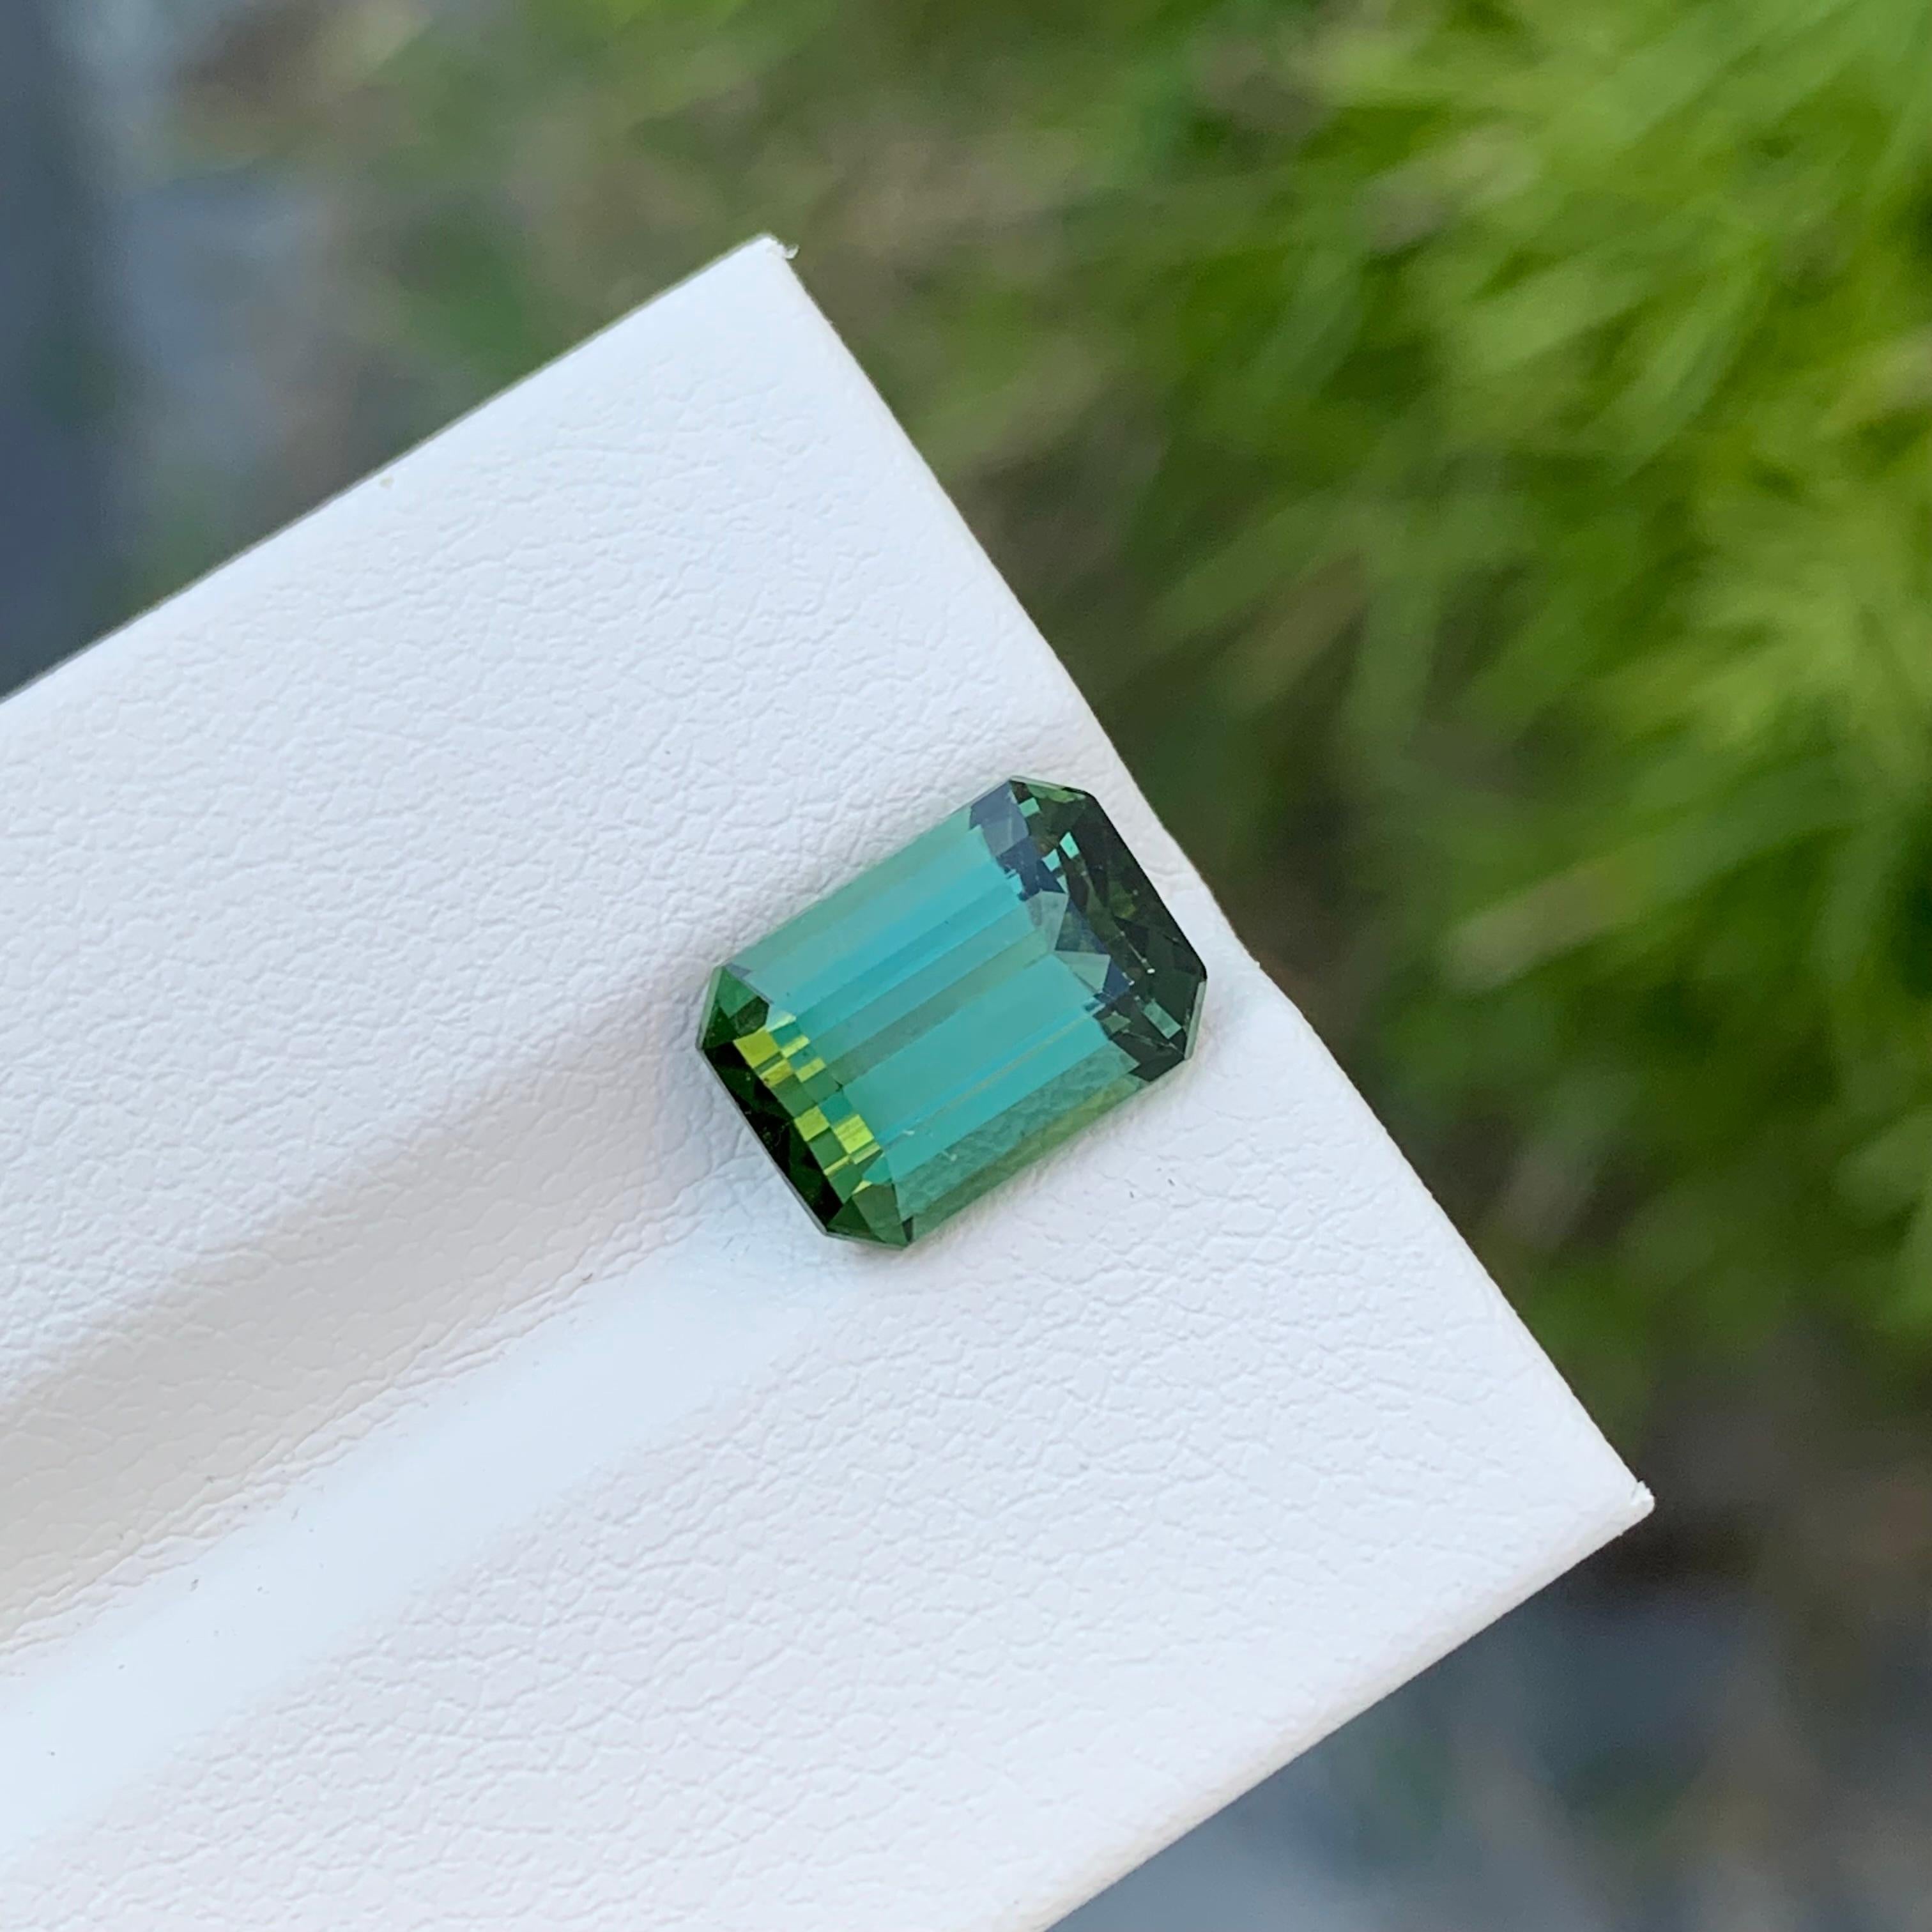 Loose Bright Green Tourmaline

Weight: 3.40 Carats
Dimension: 10 x 7.1 x 5.6 Mm
Colour: Green
Origin: Afghanistan
Certificate: On Demand
Treatment: Non

Tourmaline is a captivating gemstone known for its remarkable variety of colors, making it a